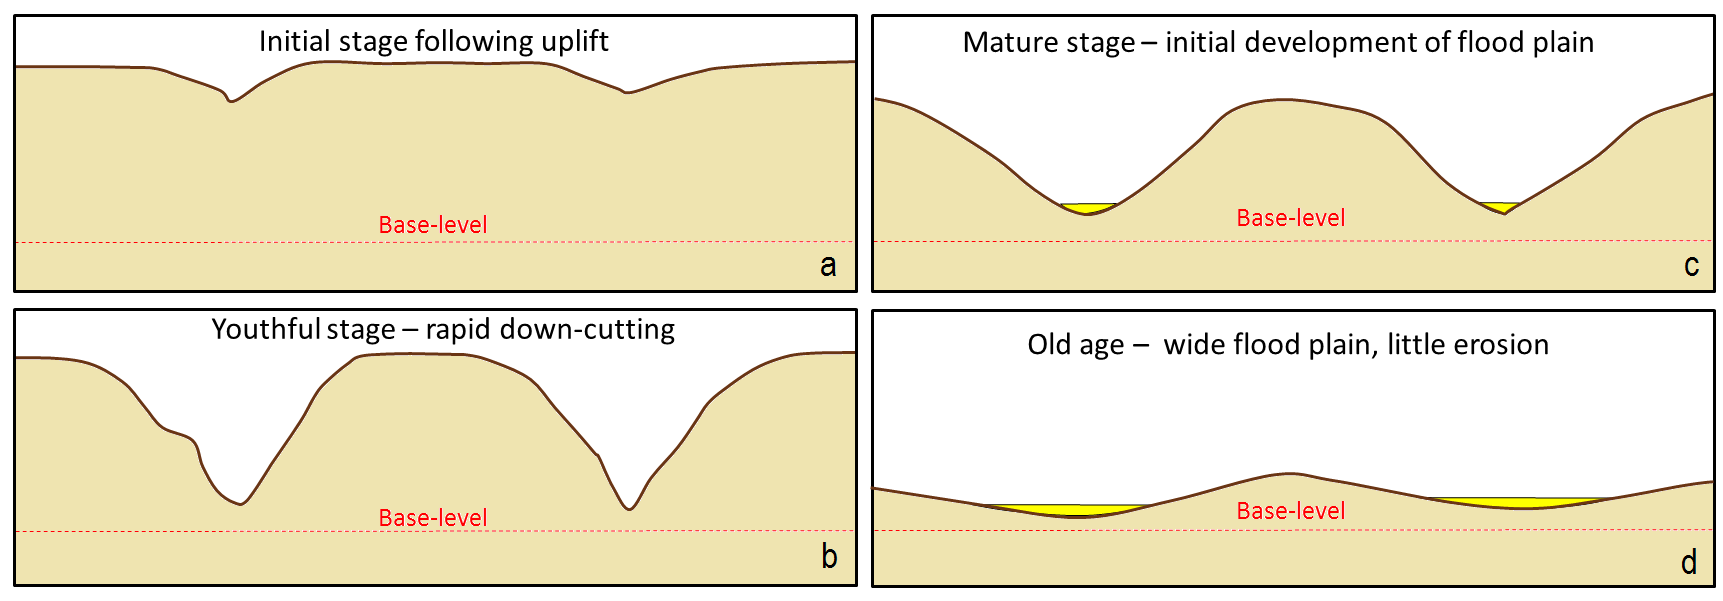 Figure 13.13 A depiction of the Davis cycle of erosion: a: initial stage, b: youthful stage, c: mature stage, and d: old age. [SE]